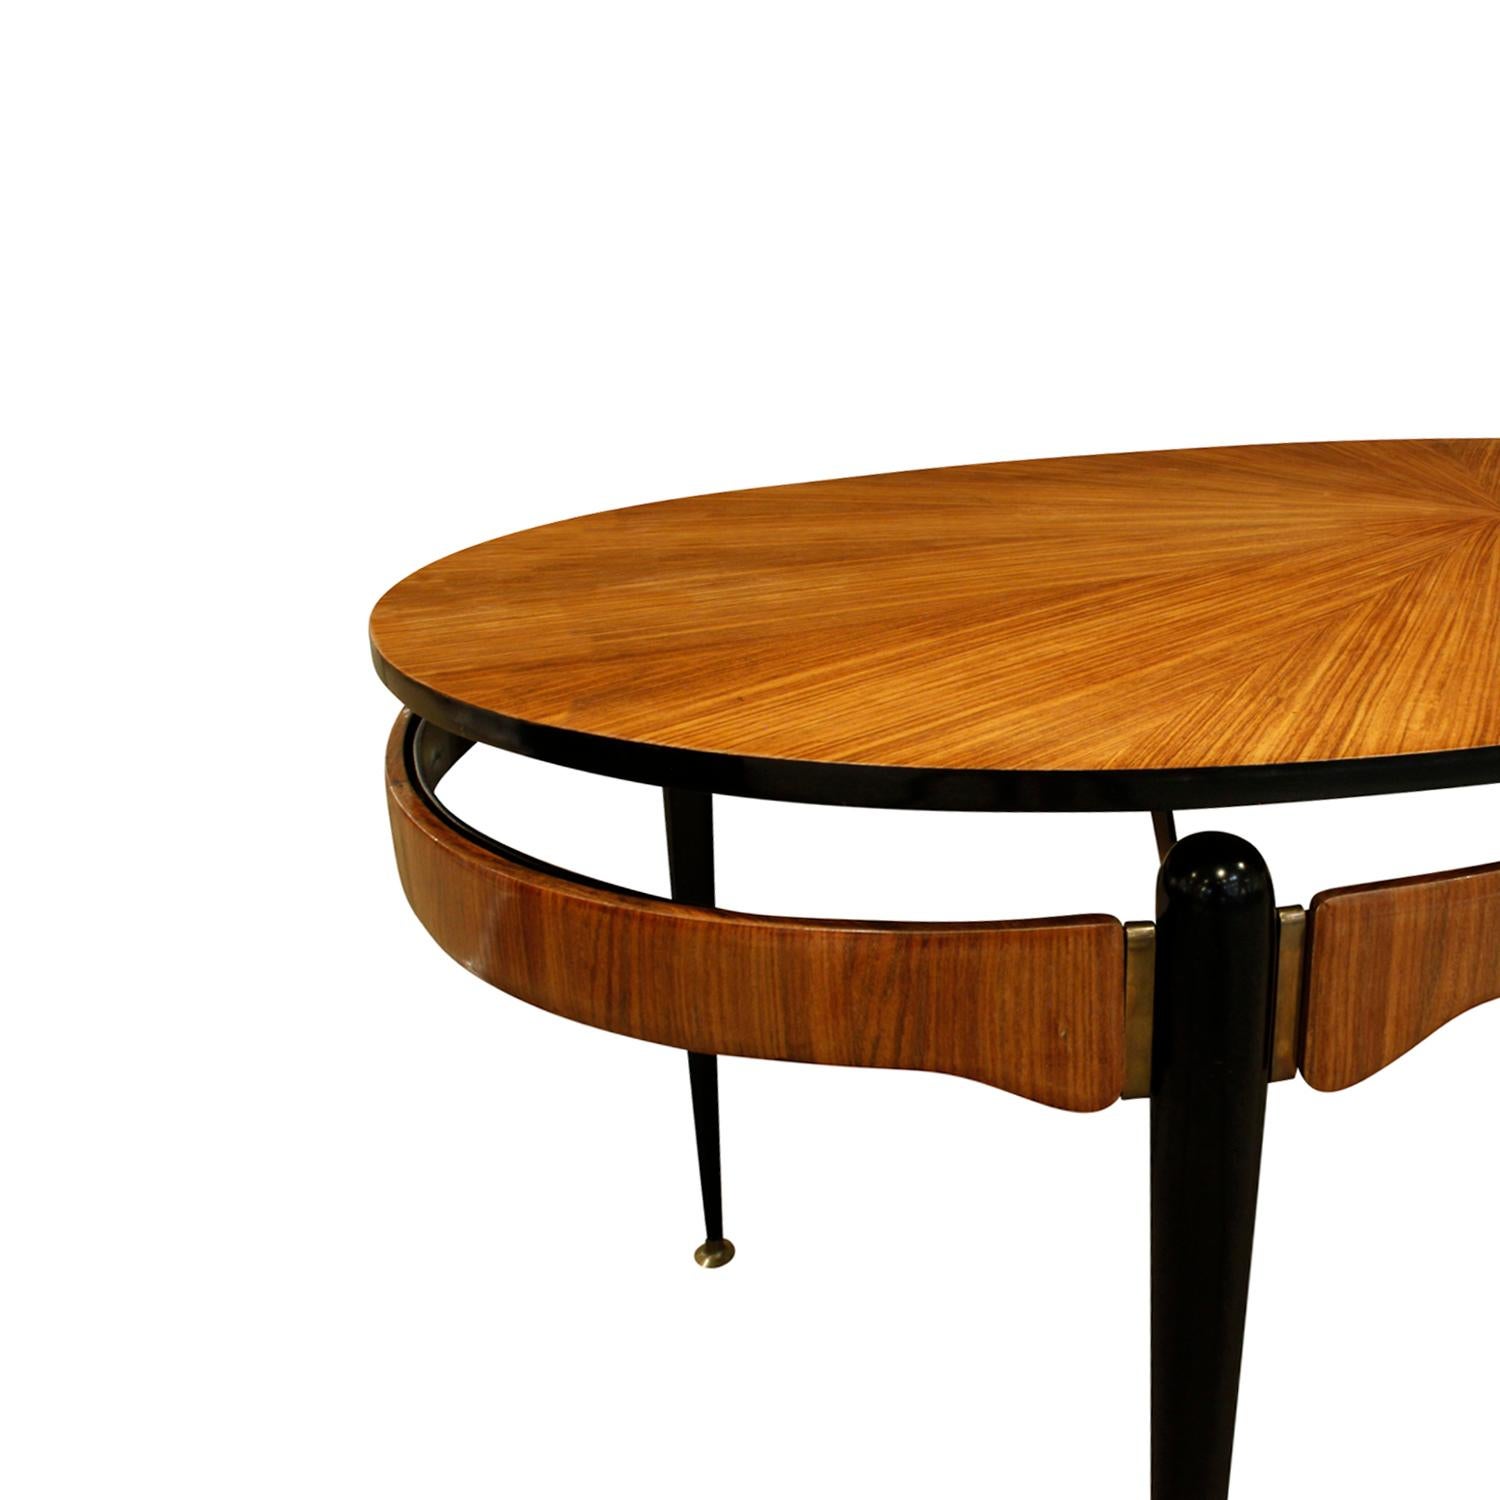 Italian Beautiful Radiating Rosewood Dining Table, attributed to Ico Parisi, circa 1954 For Sale